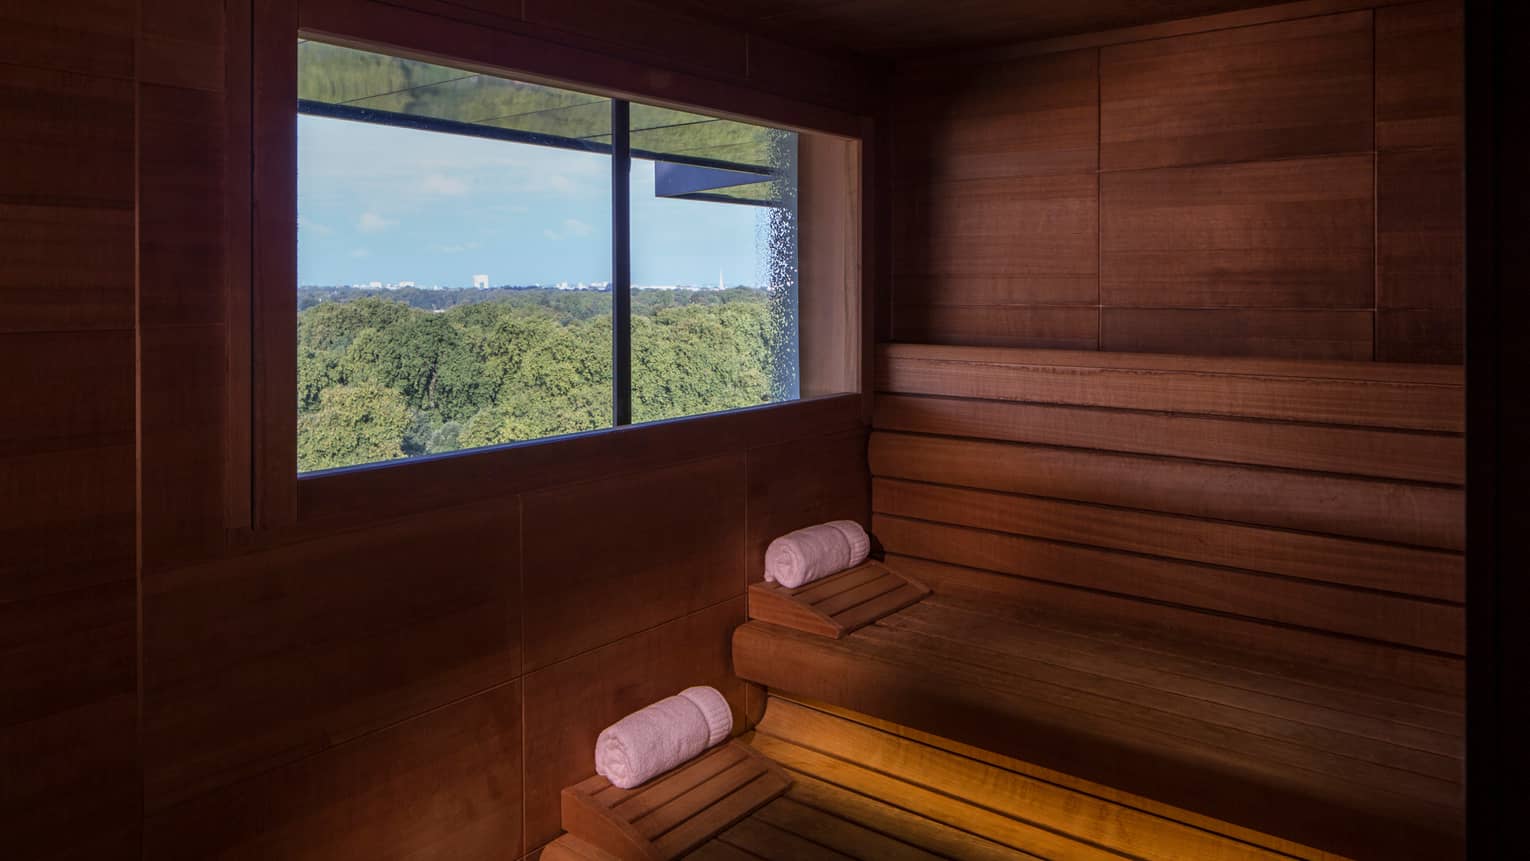 Rolled white towels on benches in wood sauna, window looking out over trees